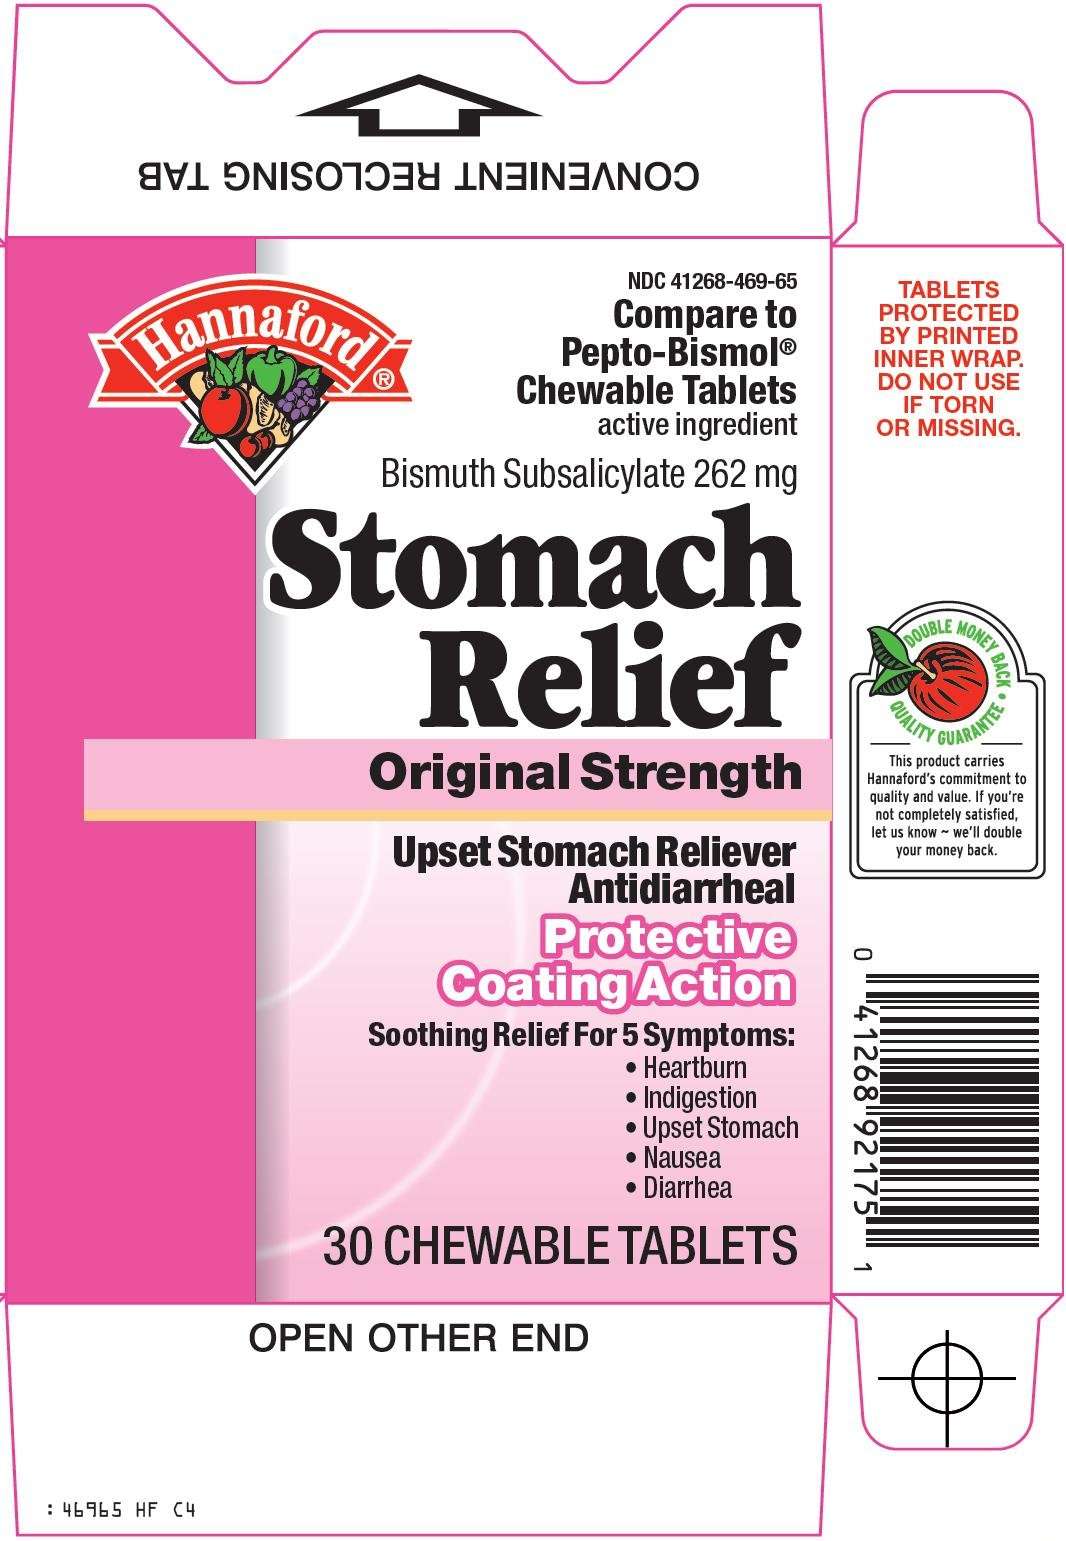 stomach relief